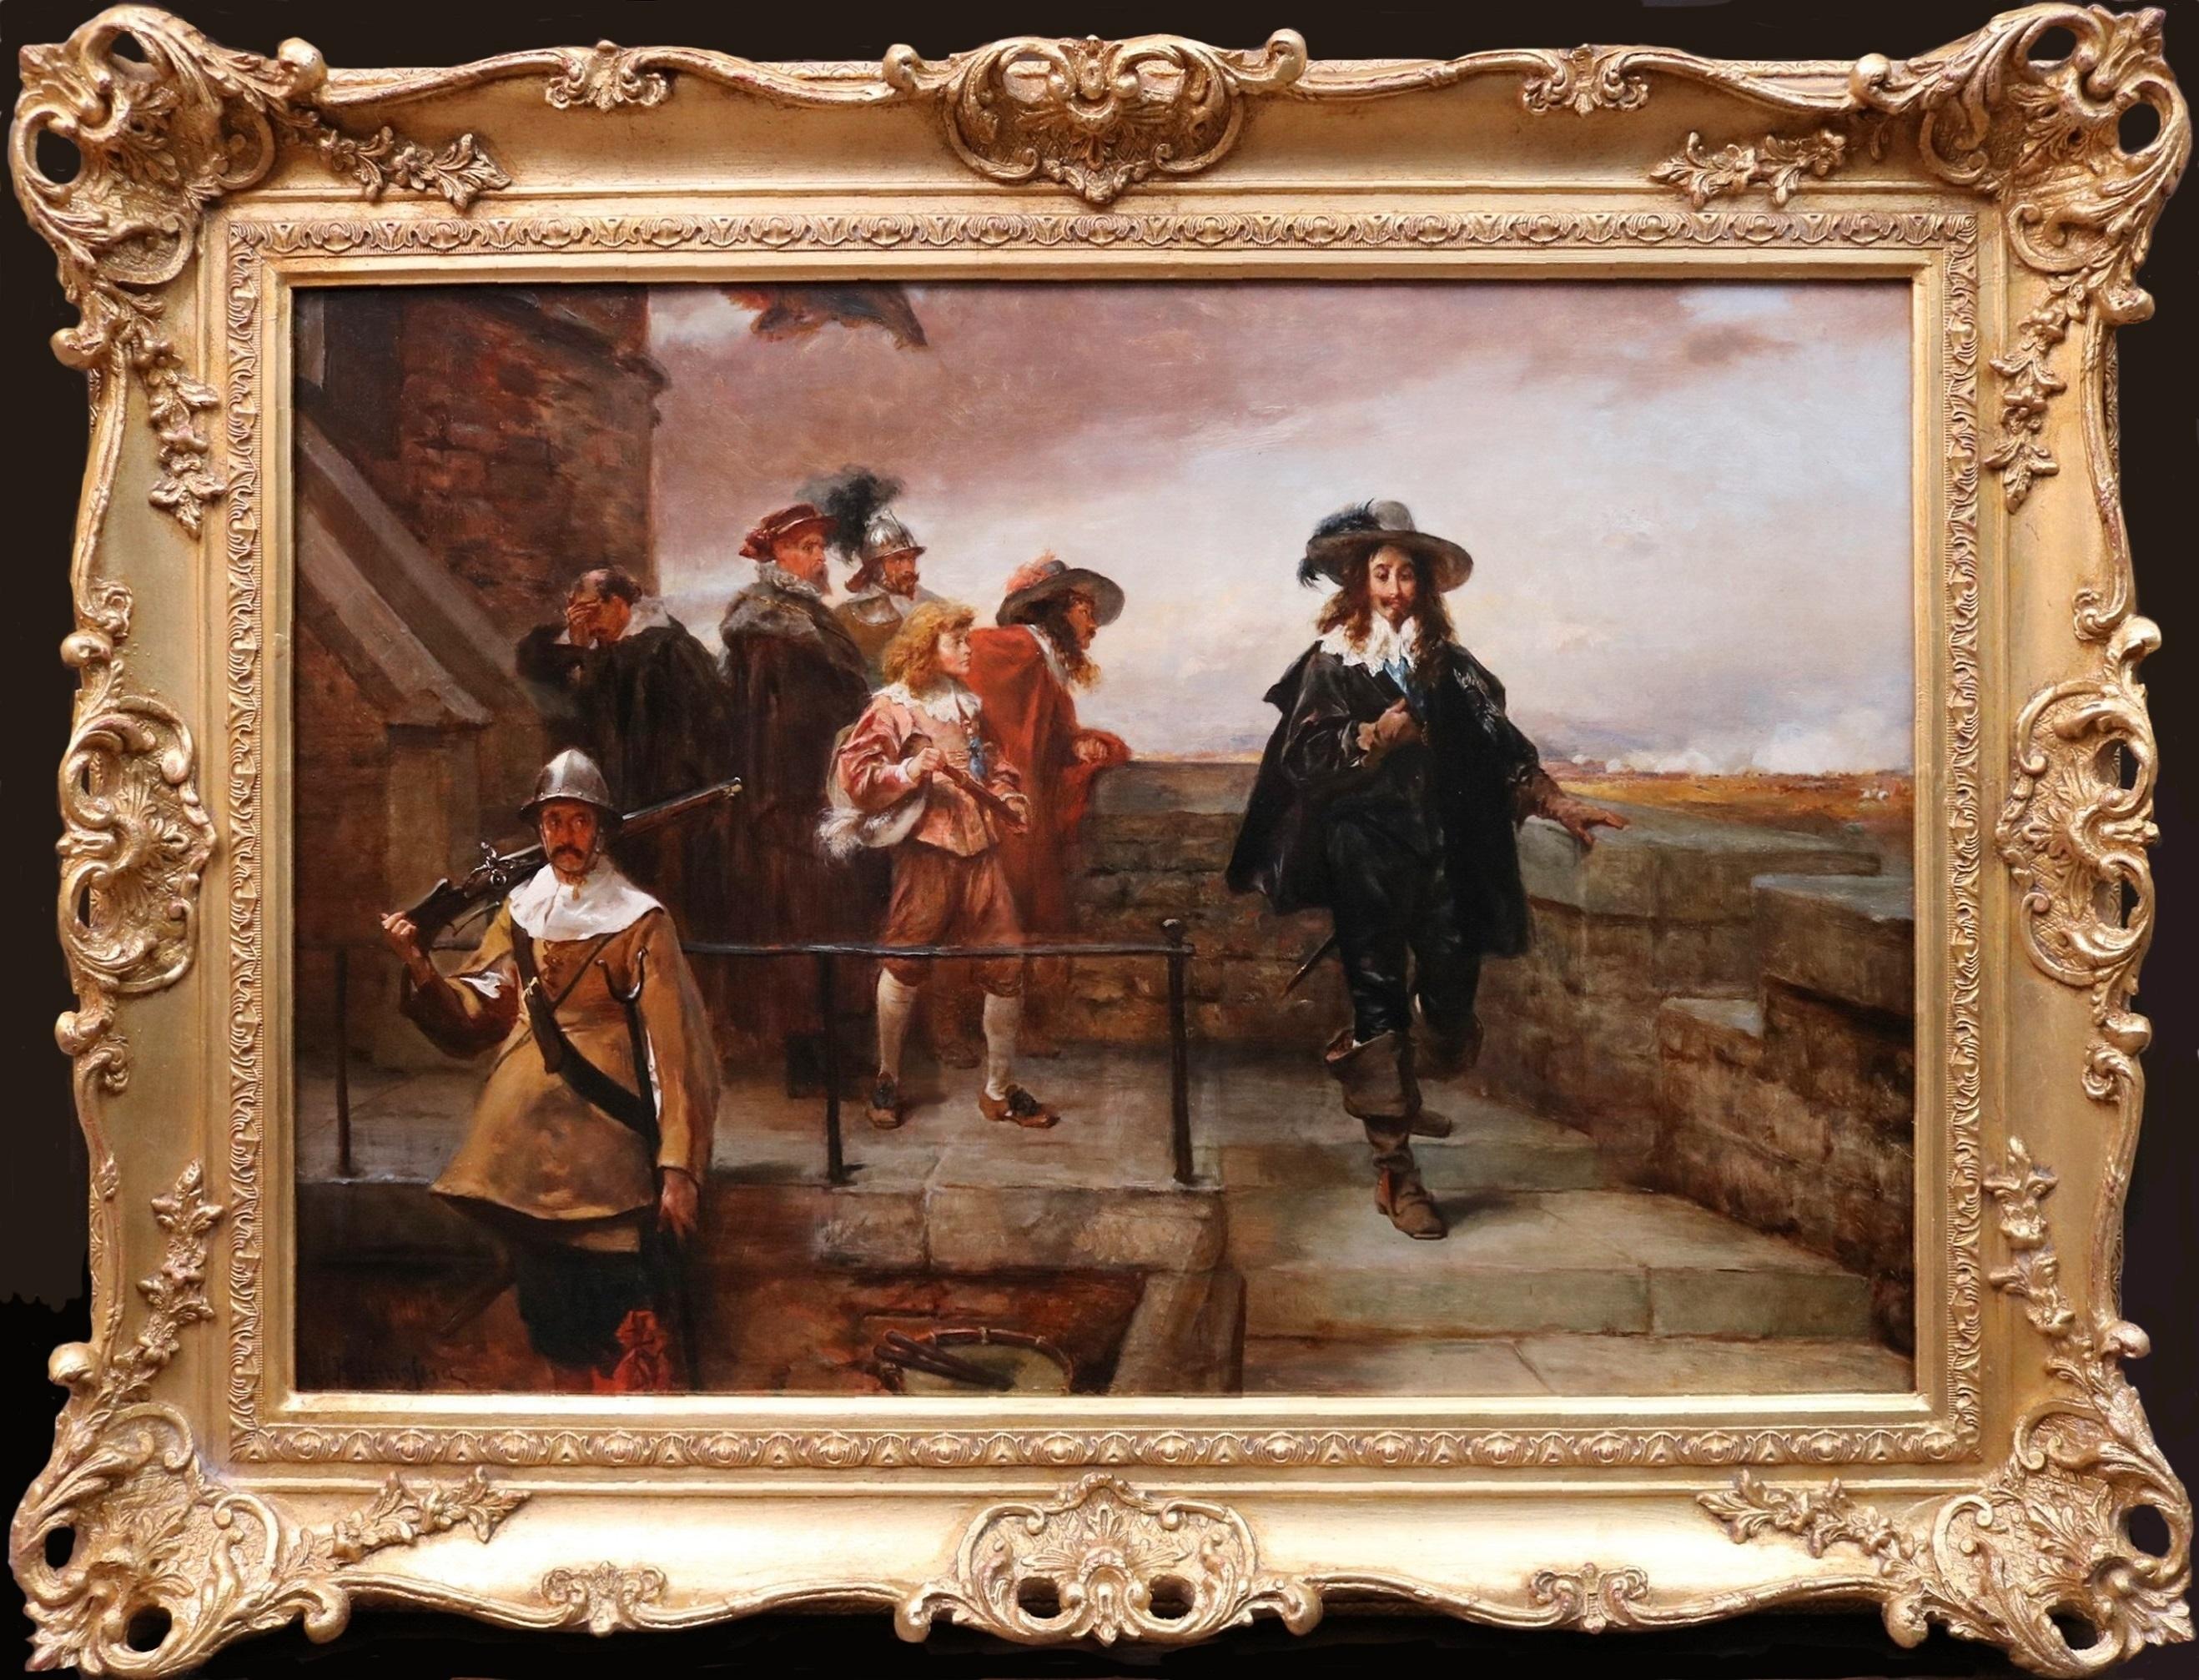 Robert Alexander Hillingford Figurative Painting - 19th Century English Civil War Oil Painting of Charles I at Battle Hillingford